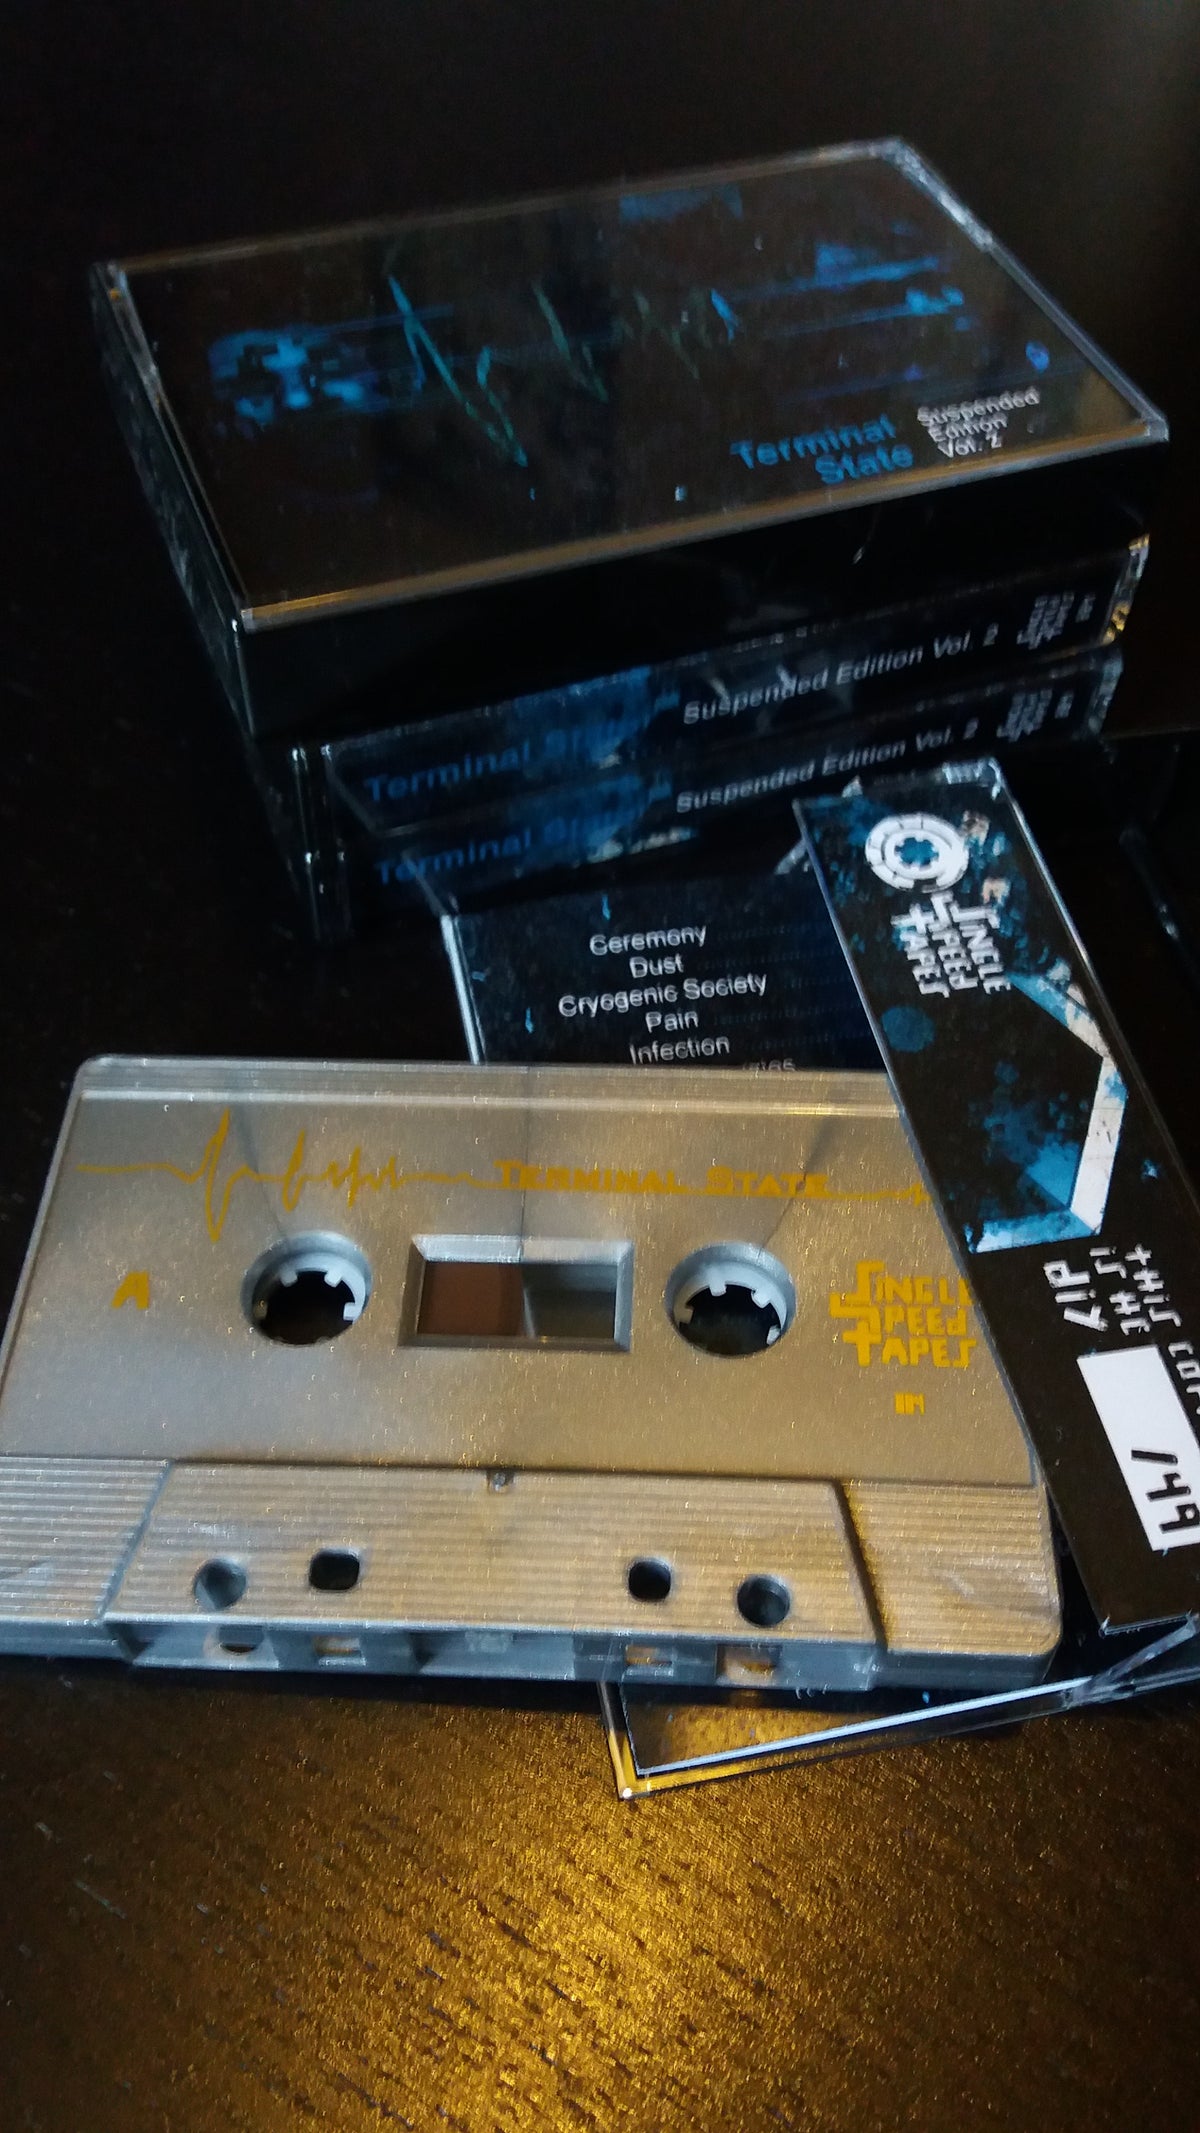 Terminal State - Suspended edition vol.2 / Tape